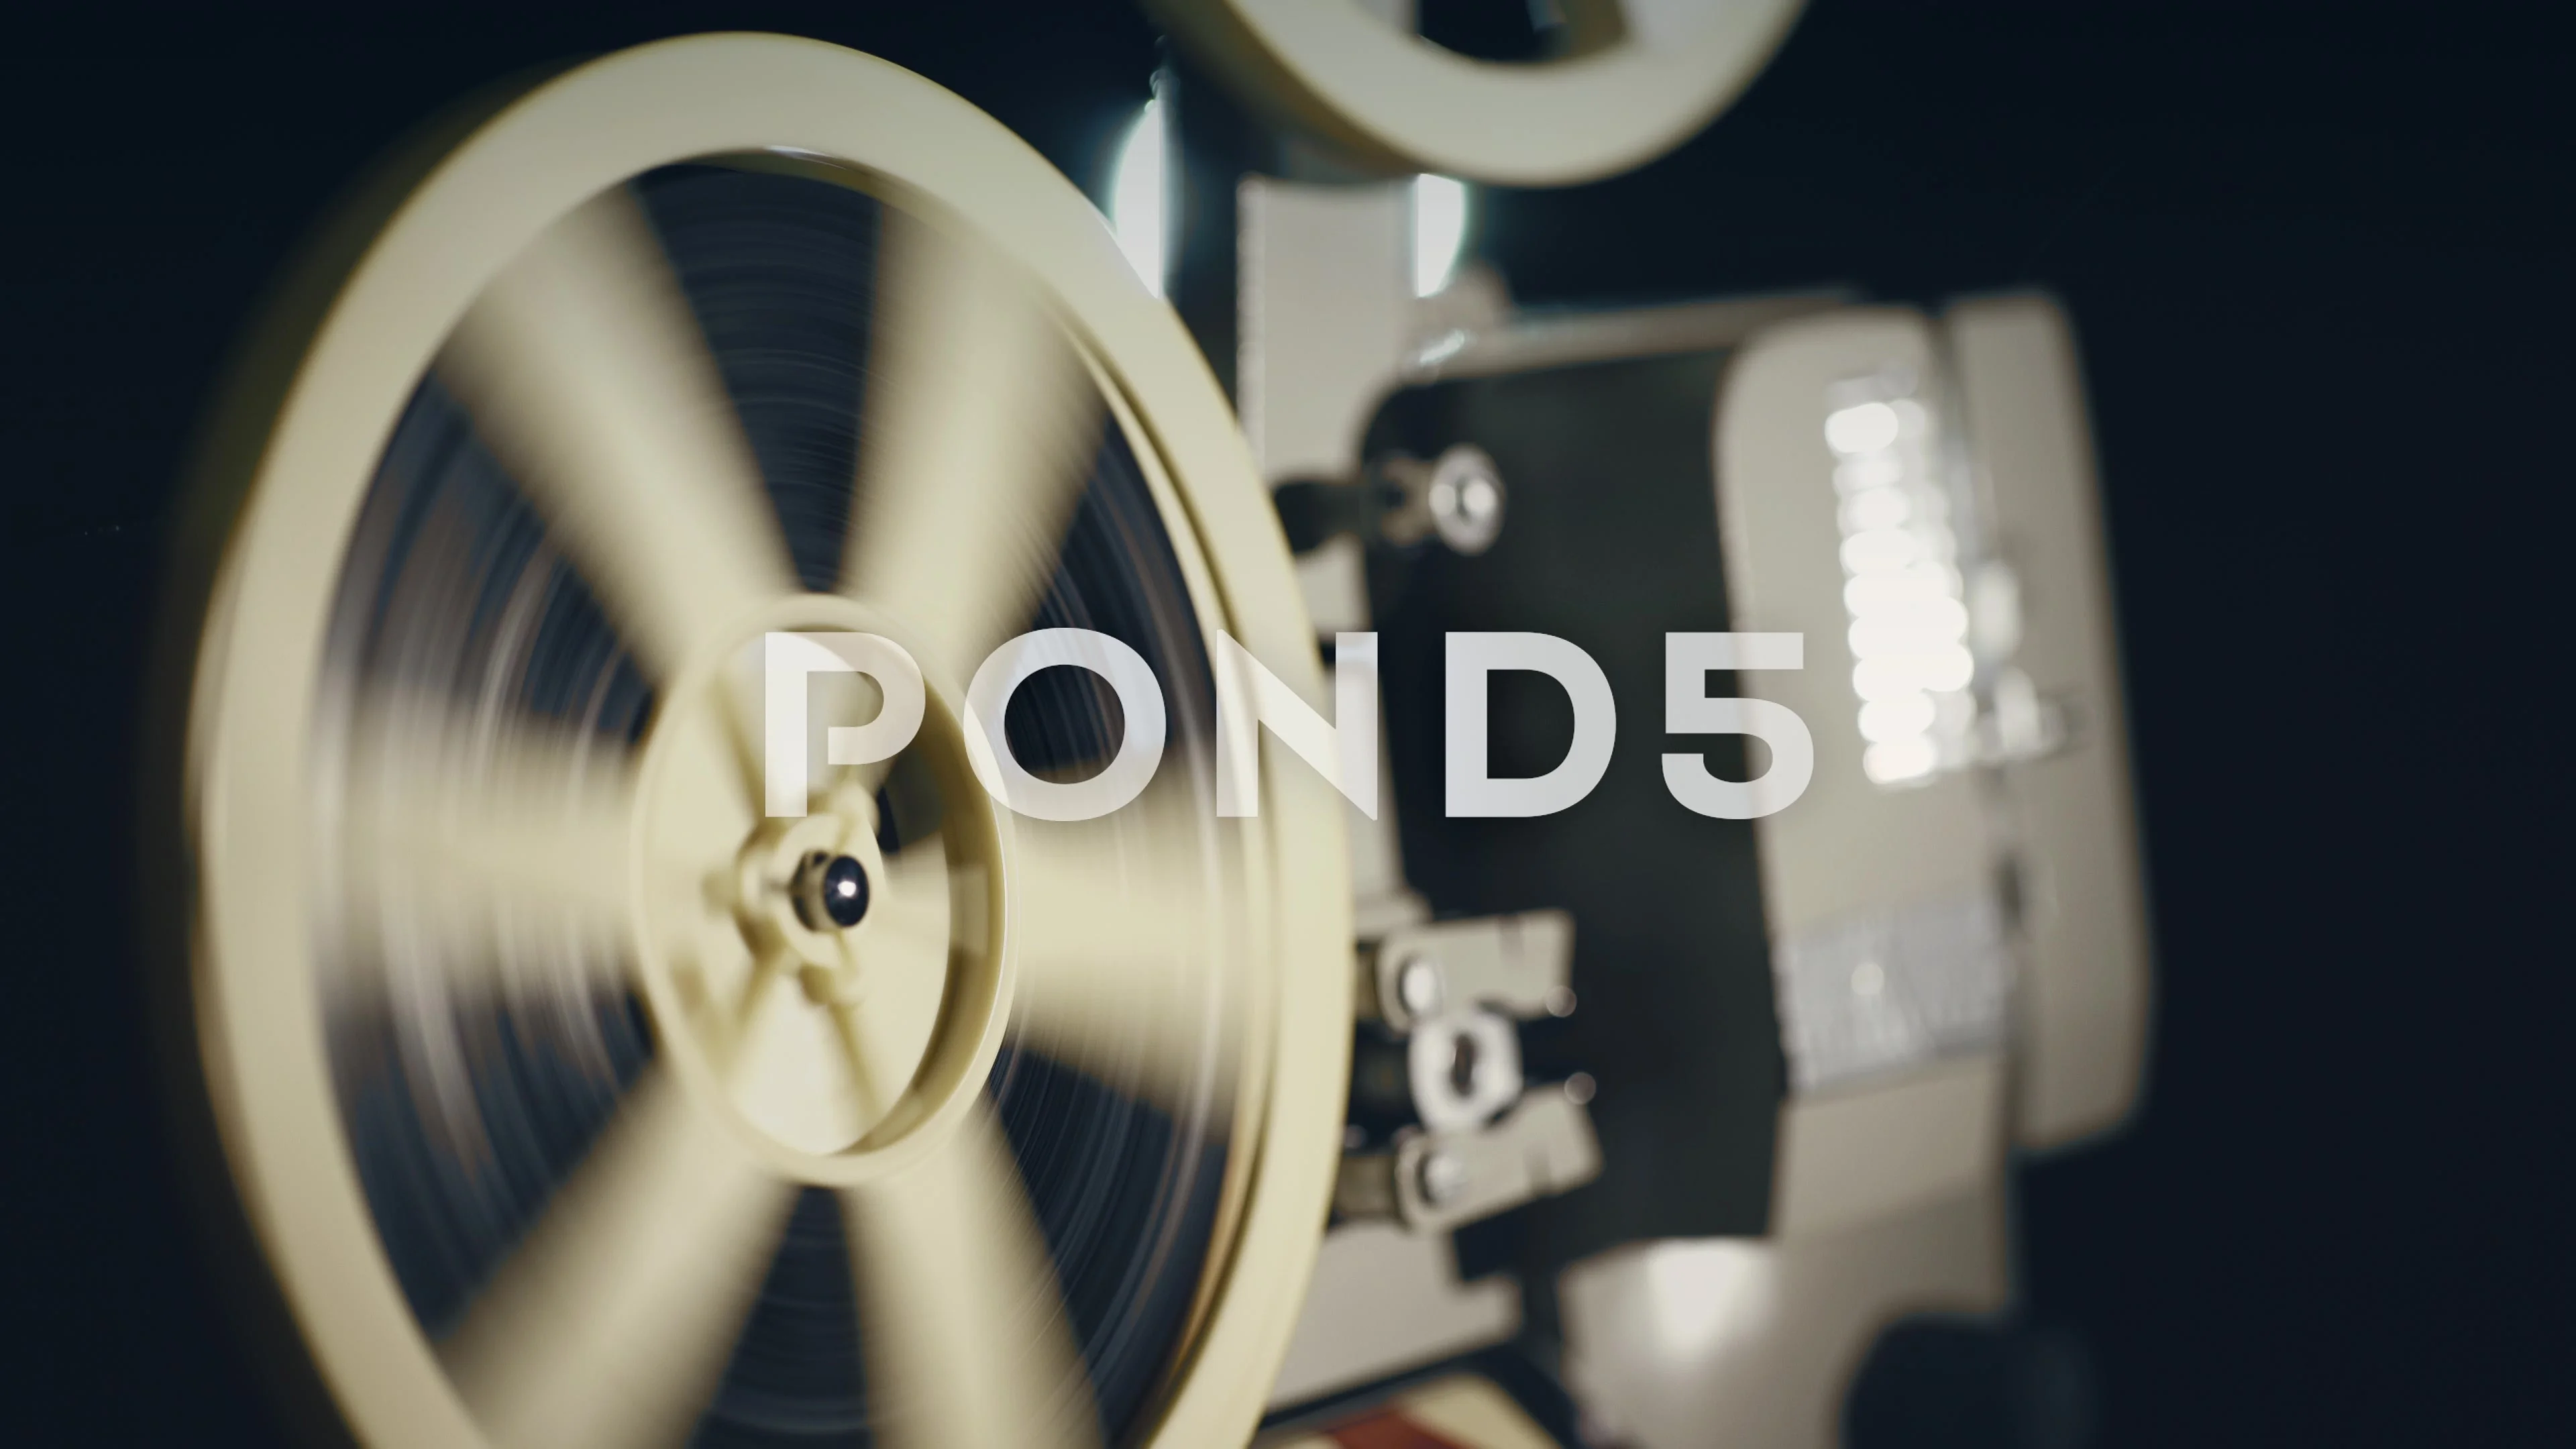 The end of the film, old movie projector, Stock Video